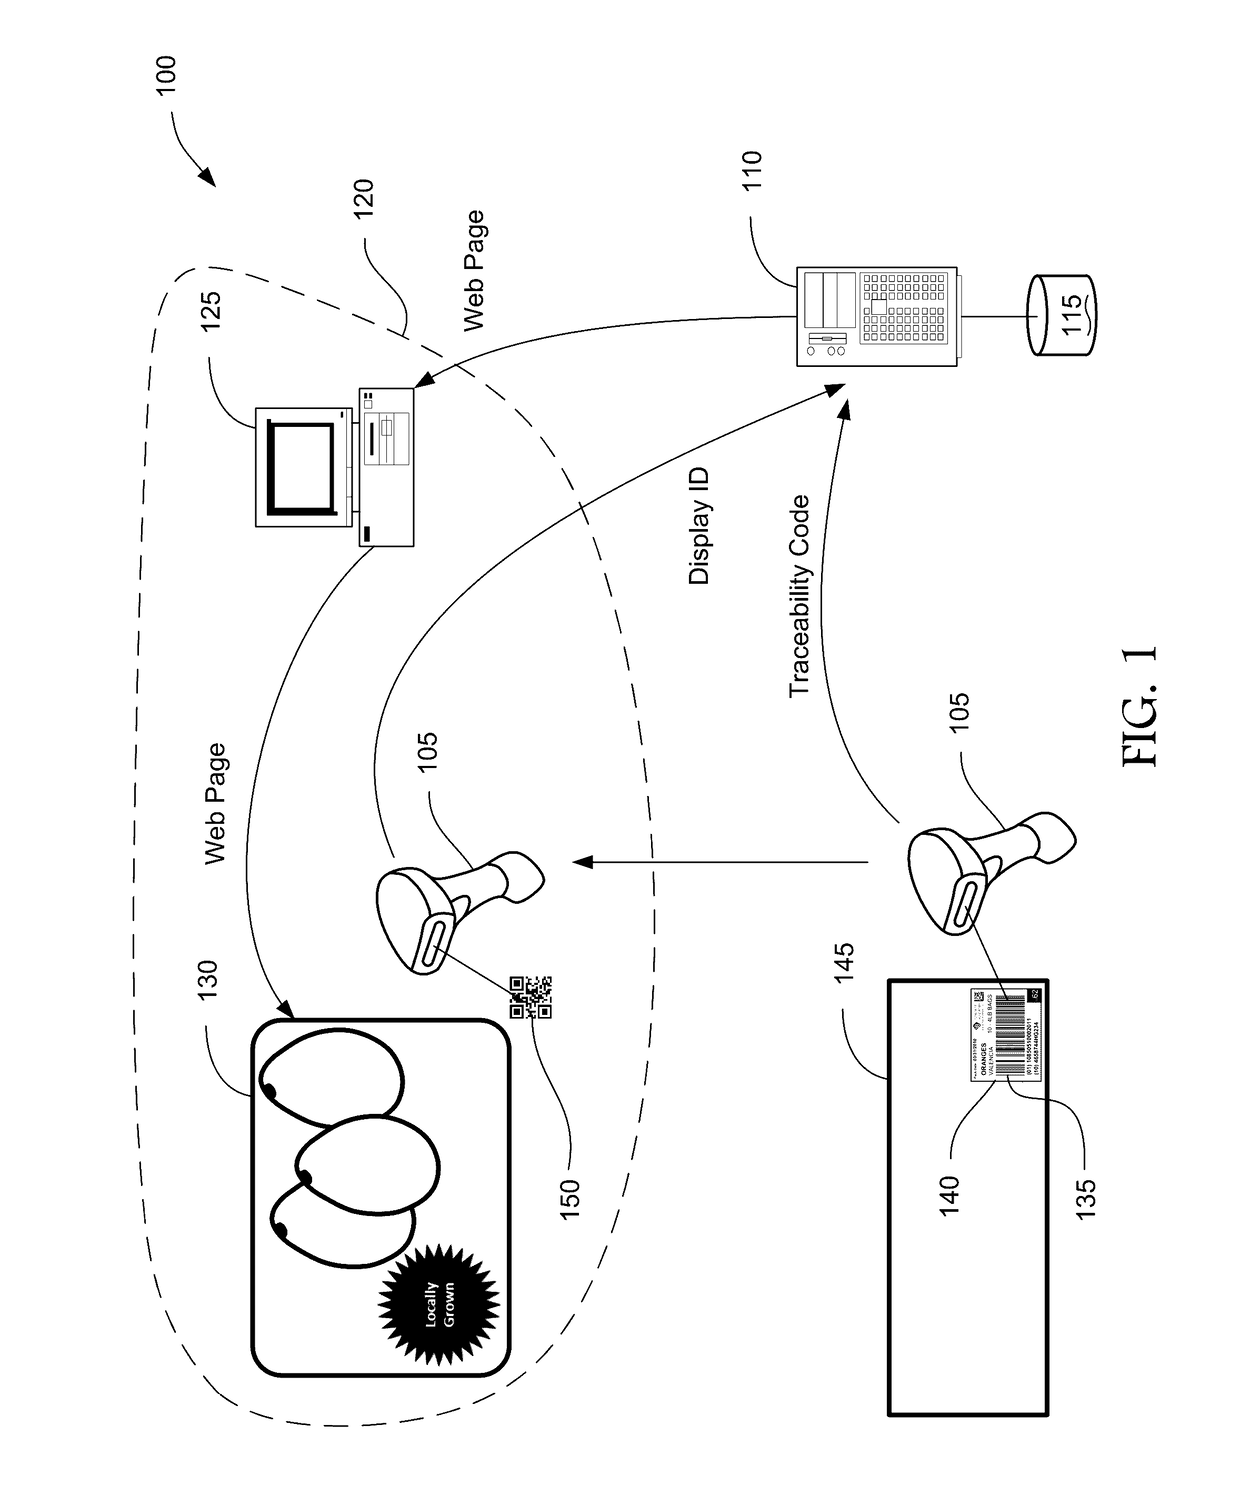 Systems and methods for determining food miles